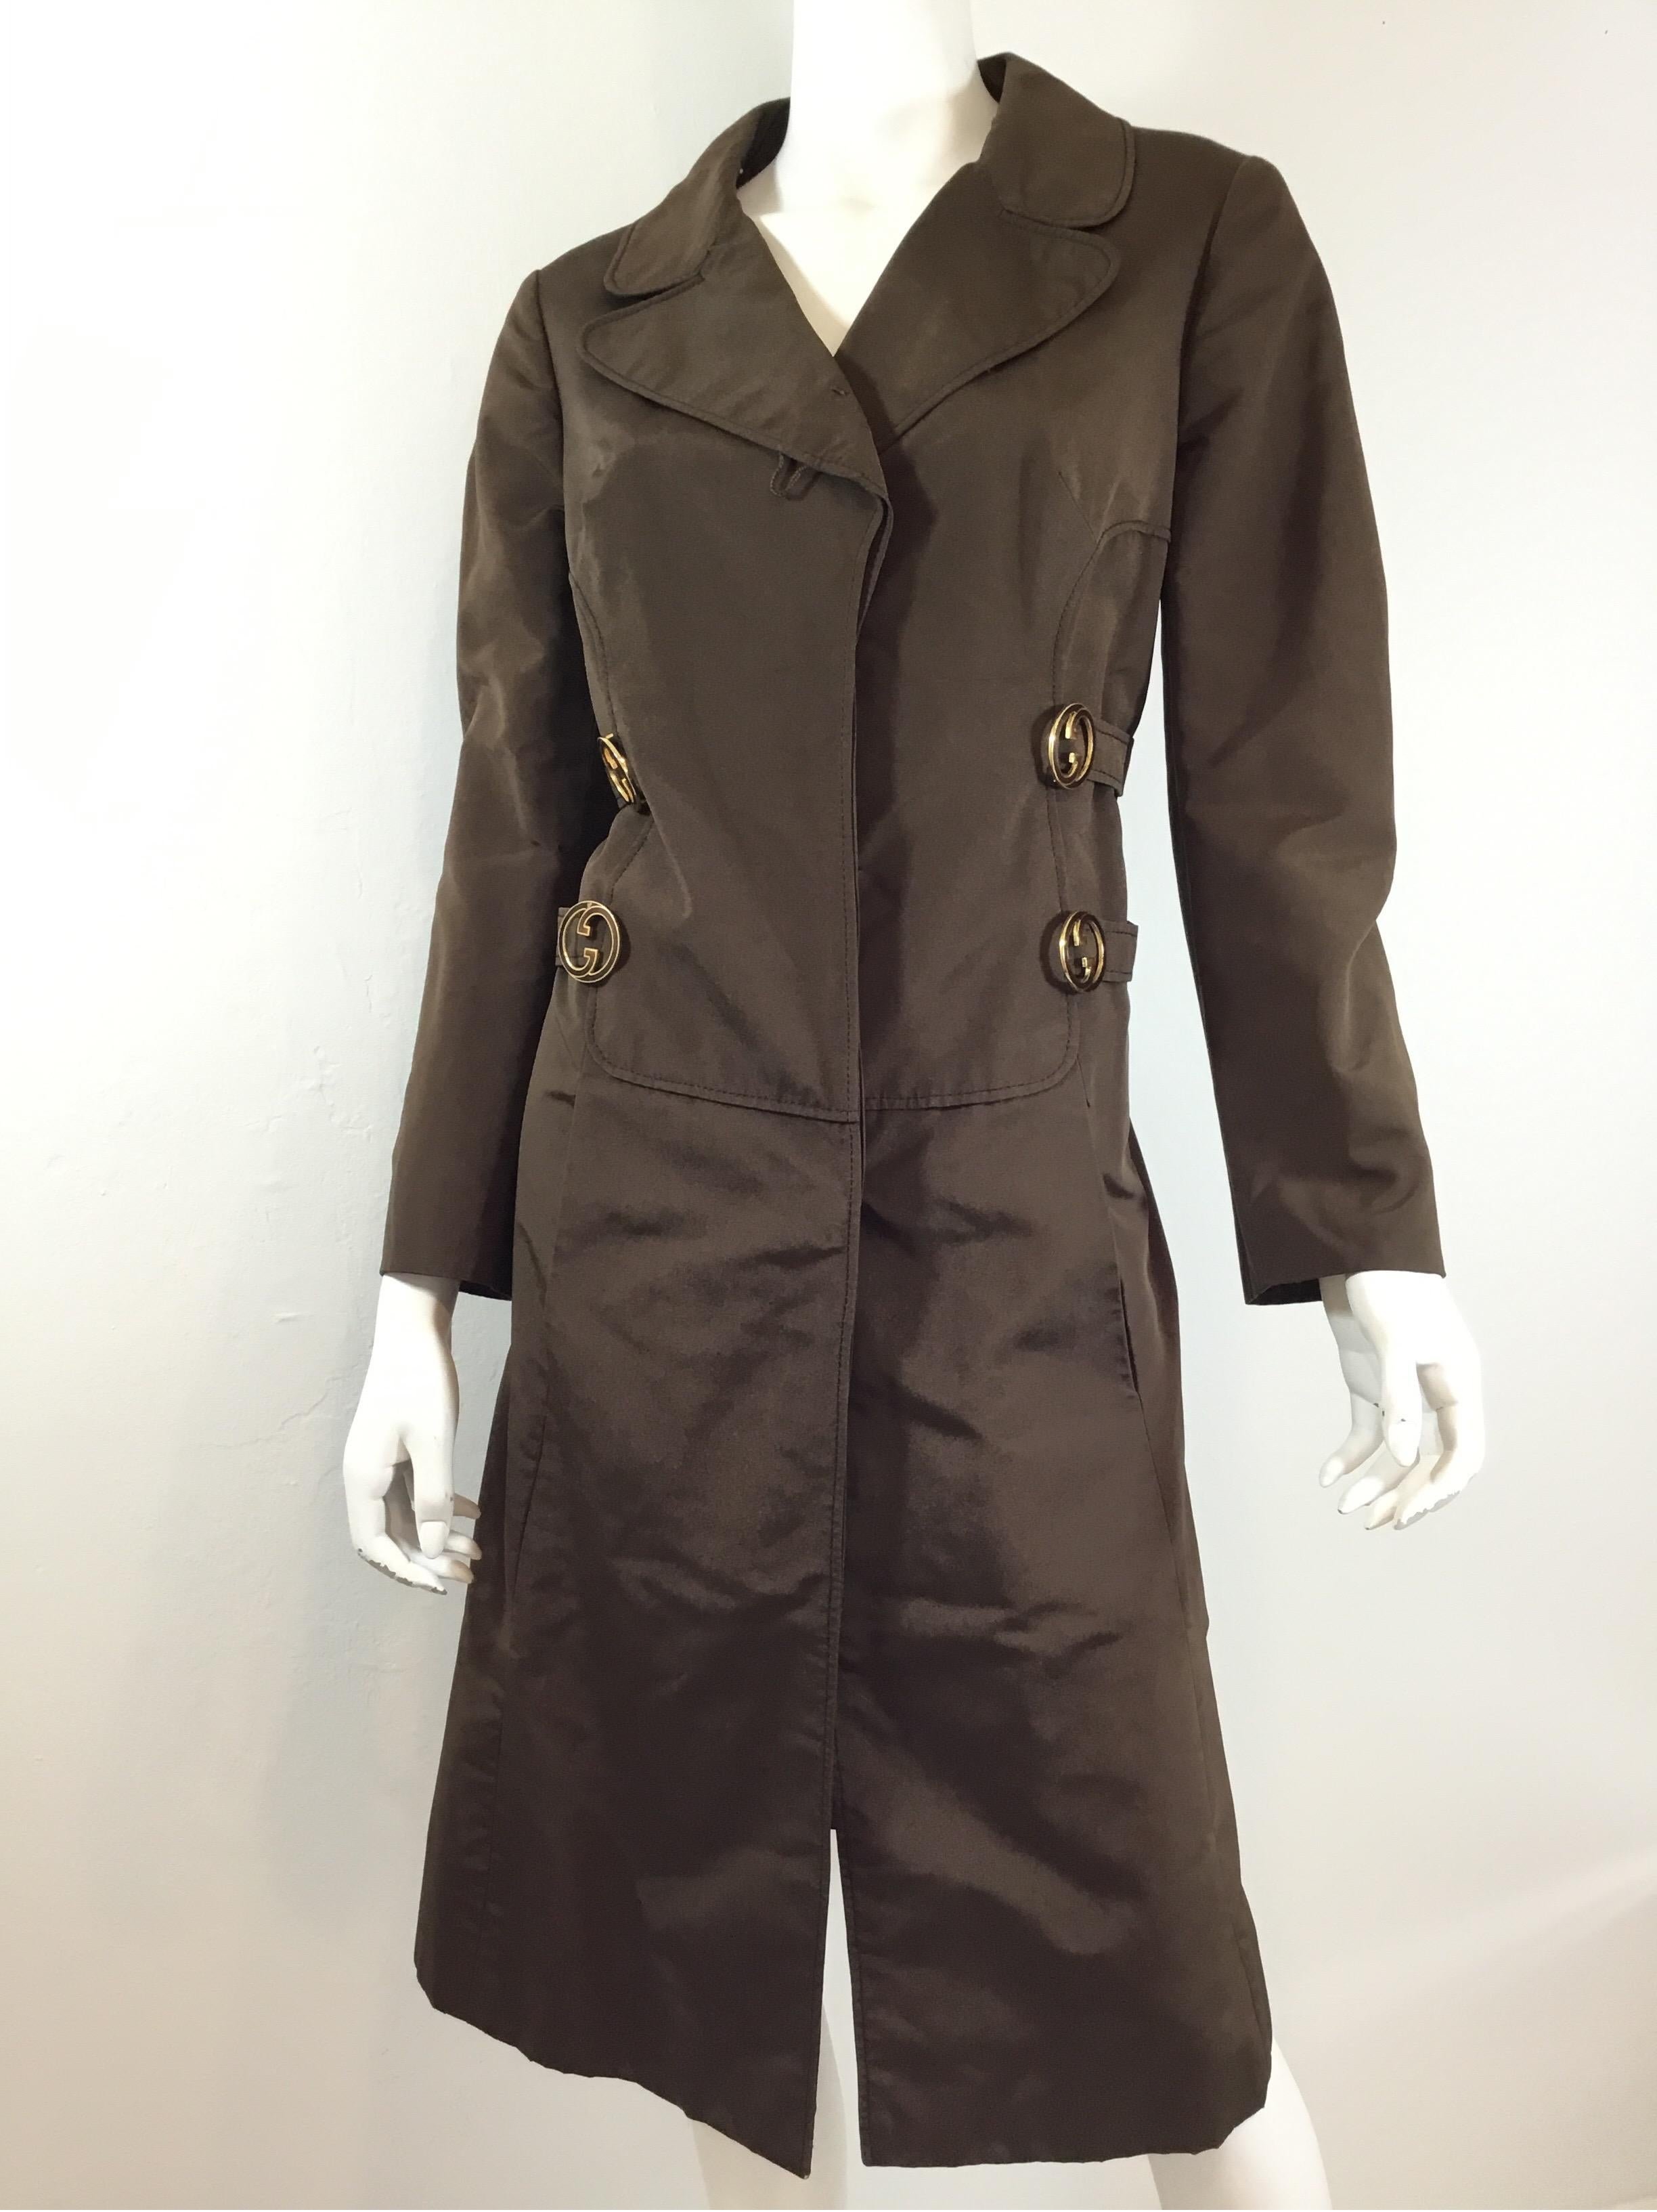 Vintage Gucci jacket featured in brown with concealed button closures along the front, decorative straps along the side with gold tone metal insignia. Jacket has pockets at the waist and is fully lined, composed of 100% waterproof silk. Made in